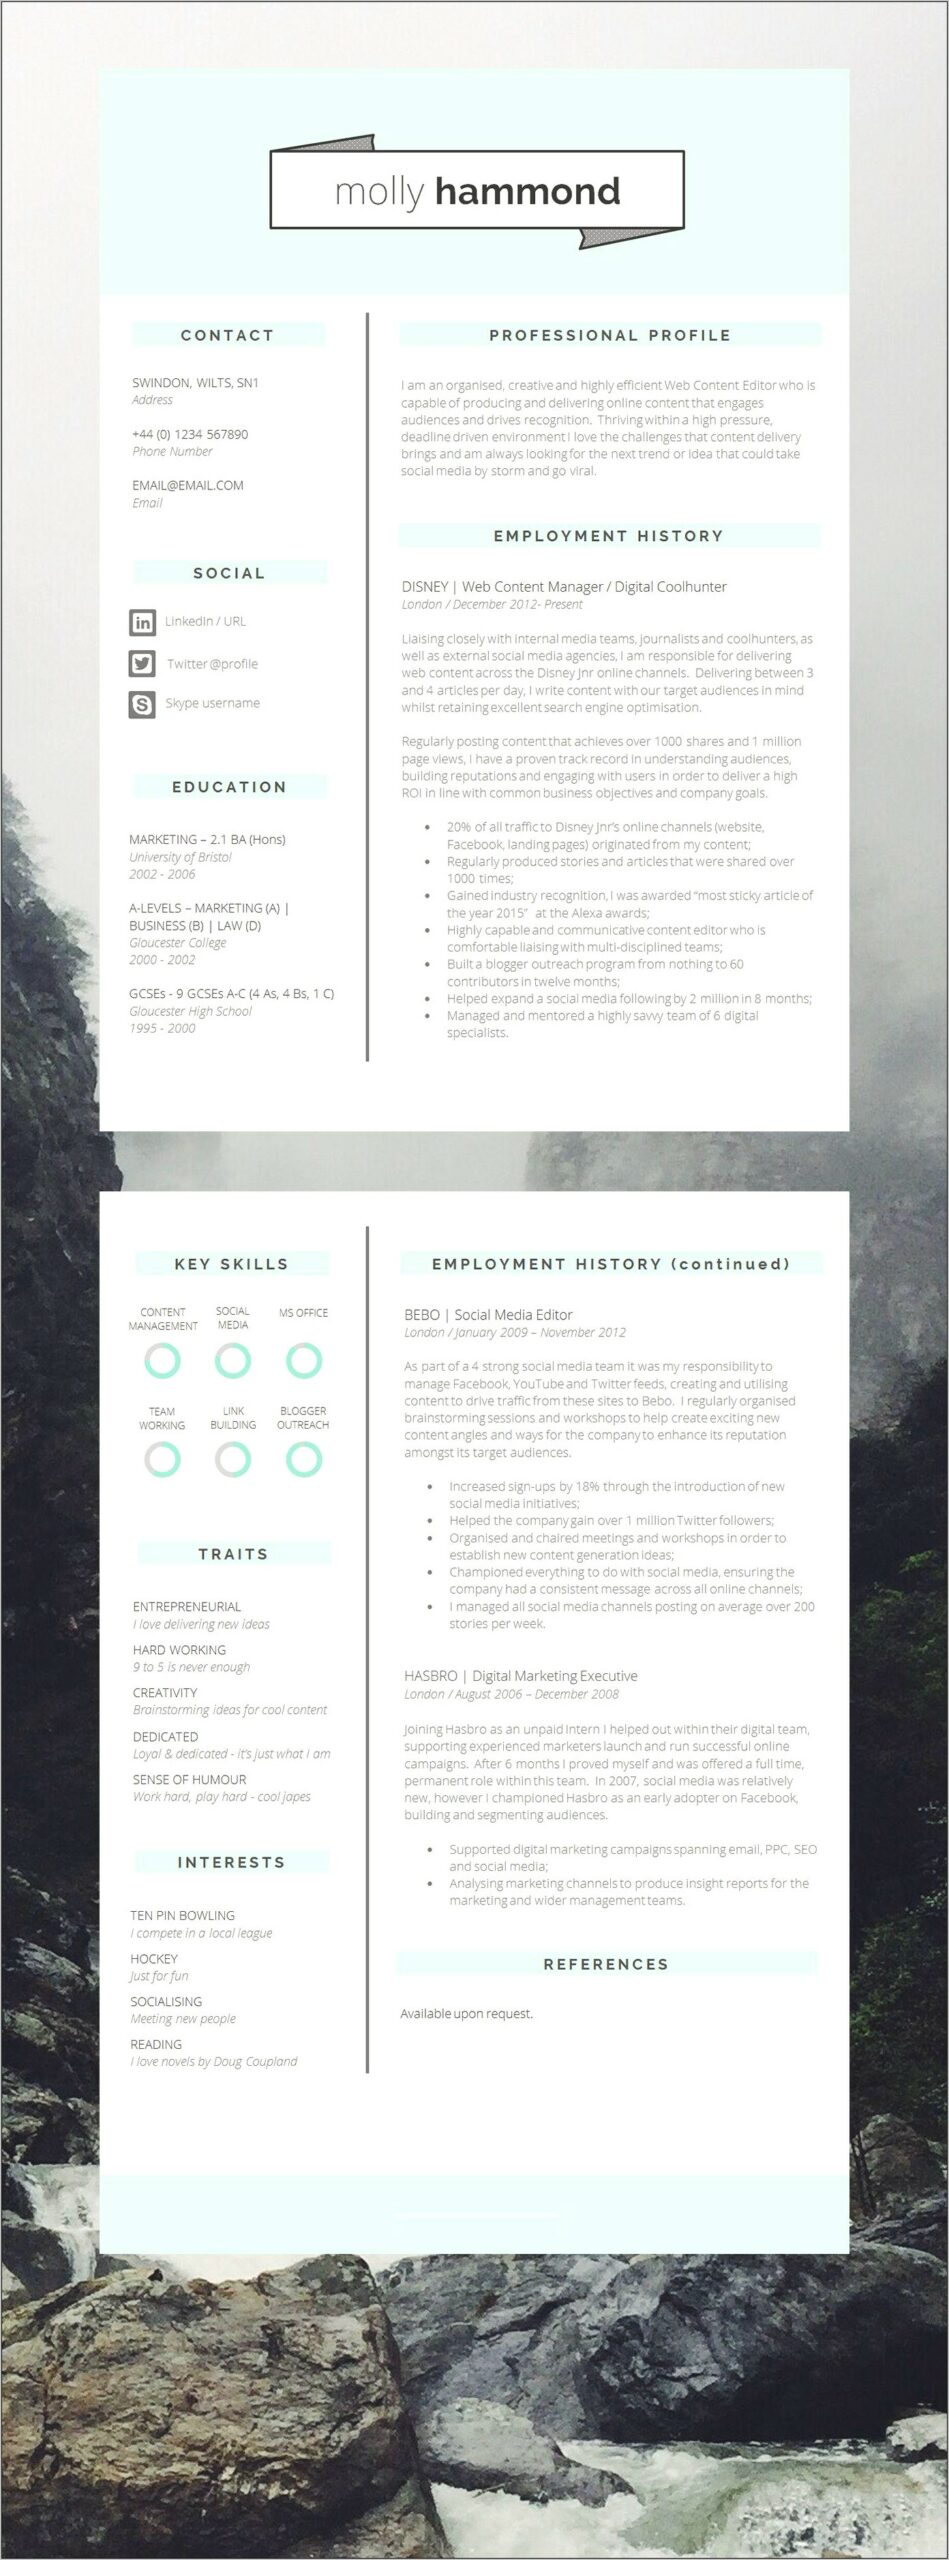 Does Uber Look Good On Resume